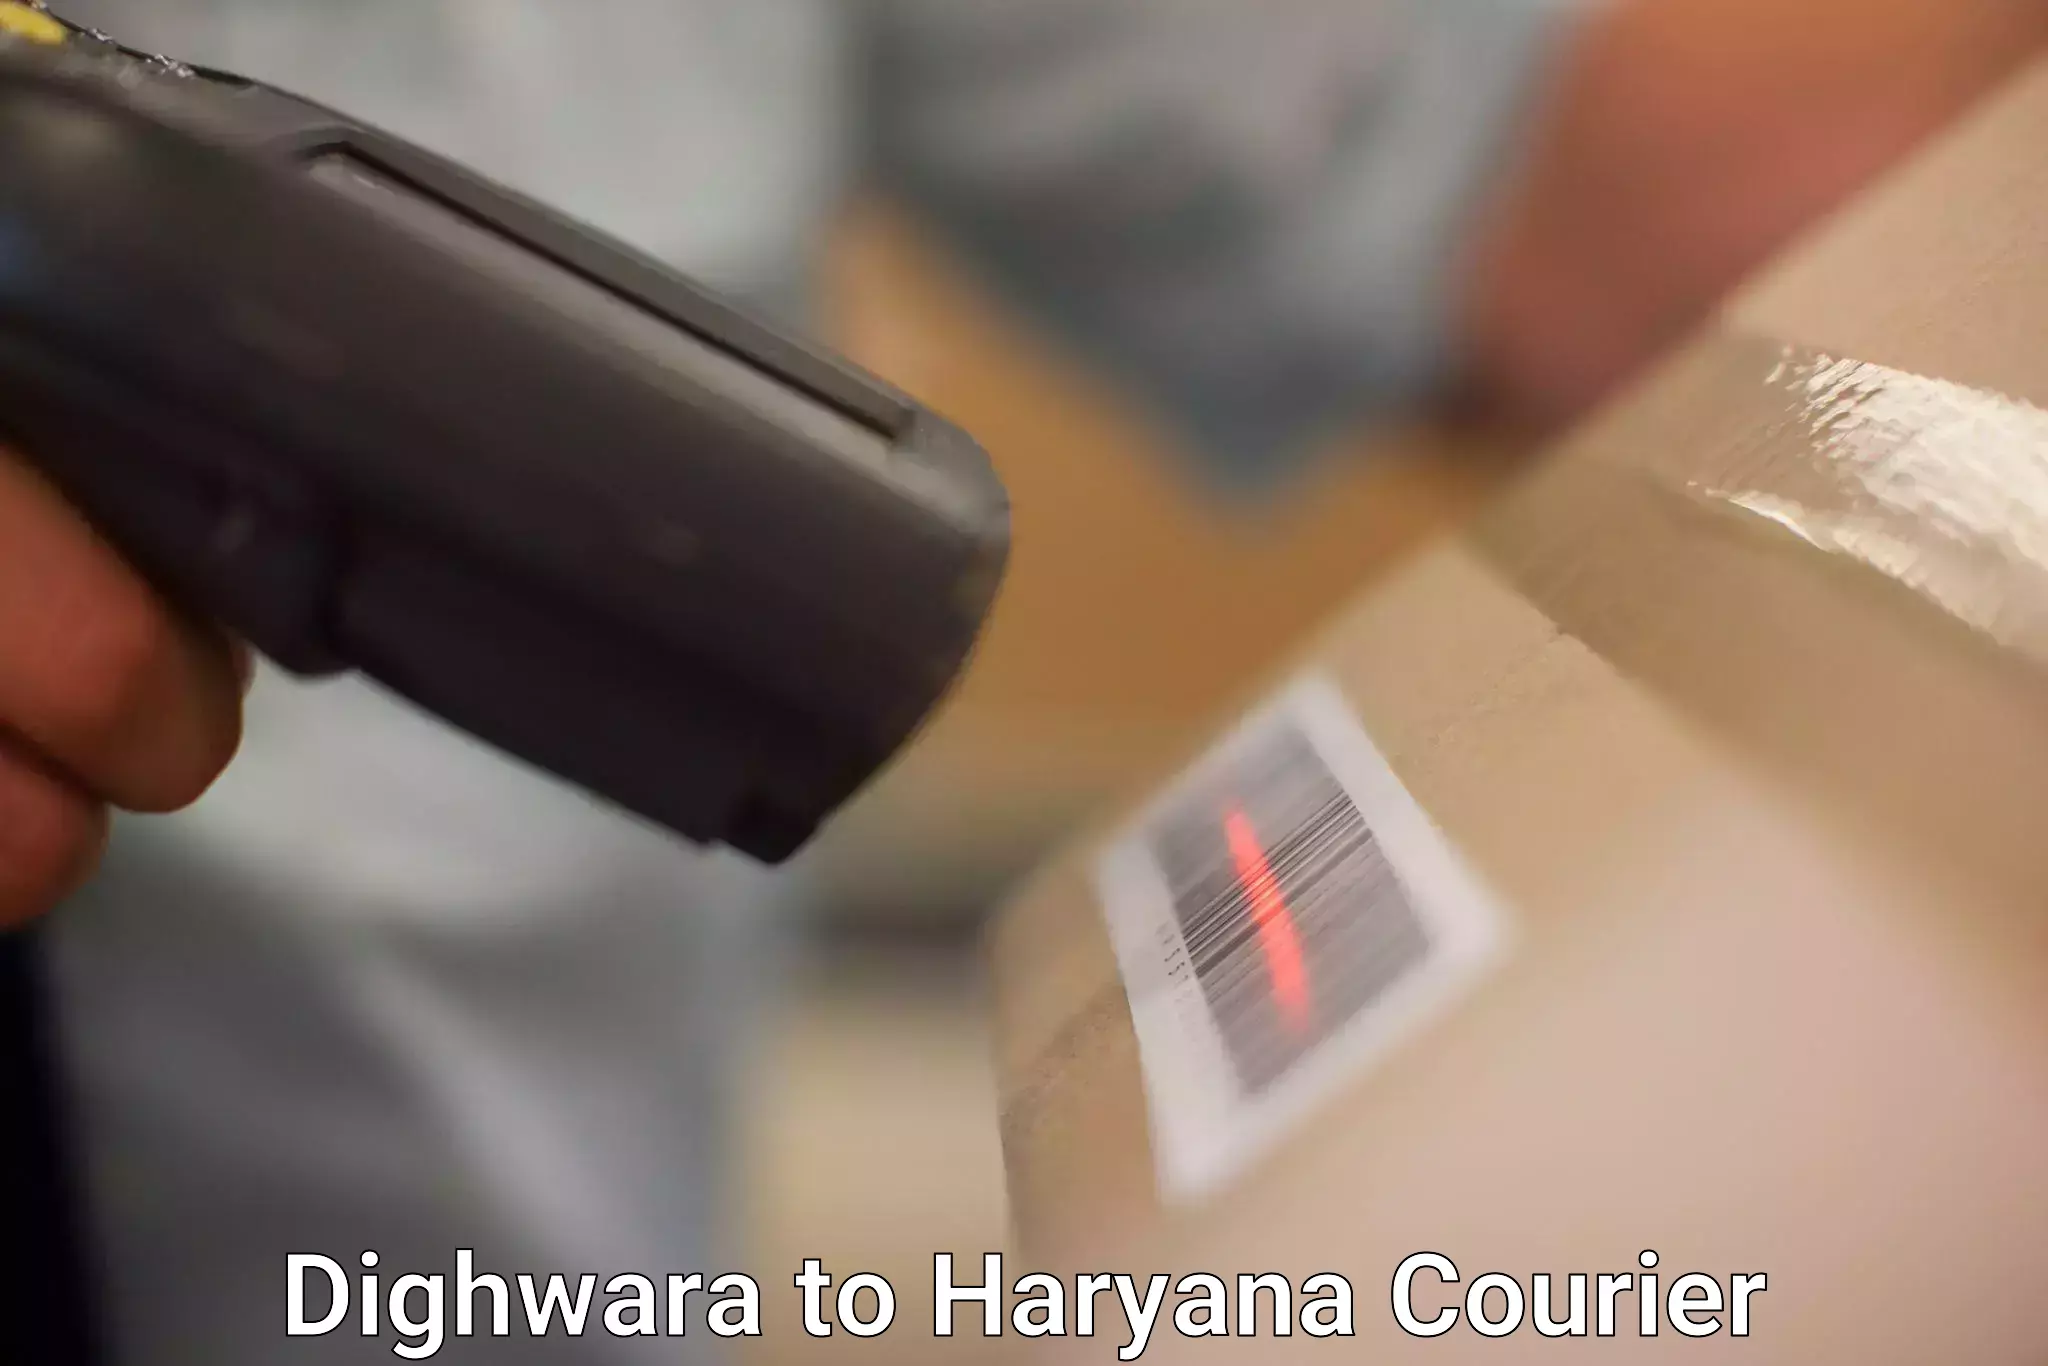 Specialized courier services Dighwara to Chaudhary Charan Singh Haryana Agricultural University Hisar